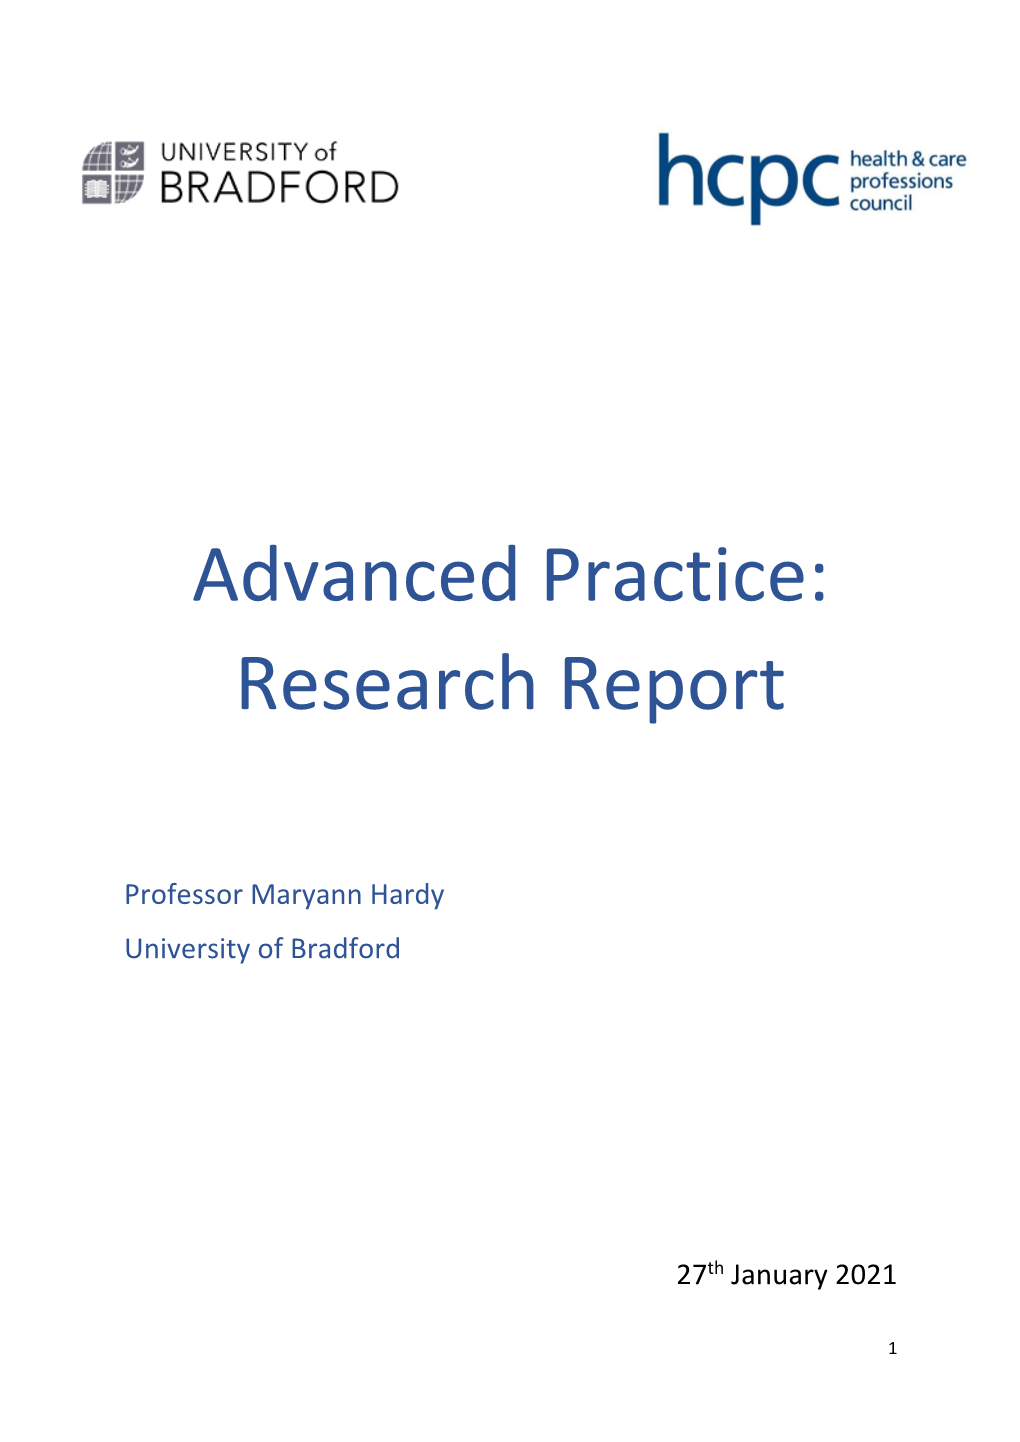 Advanced Practice: Research Report